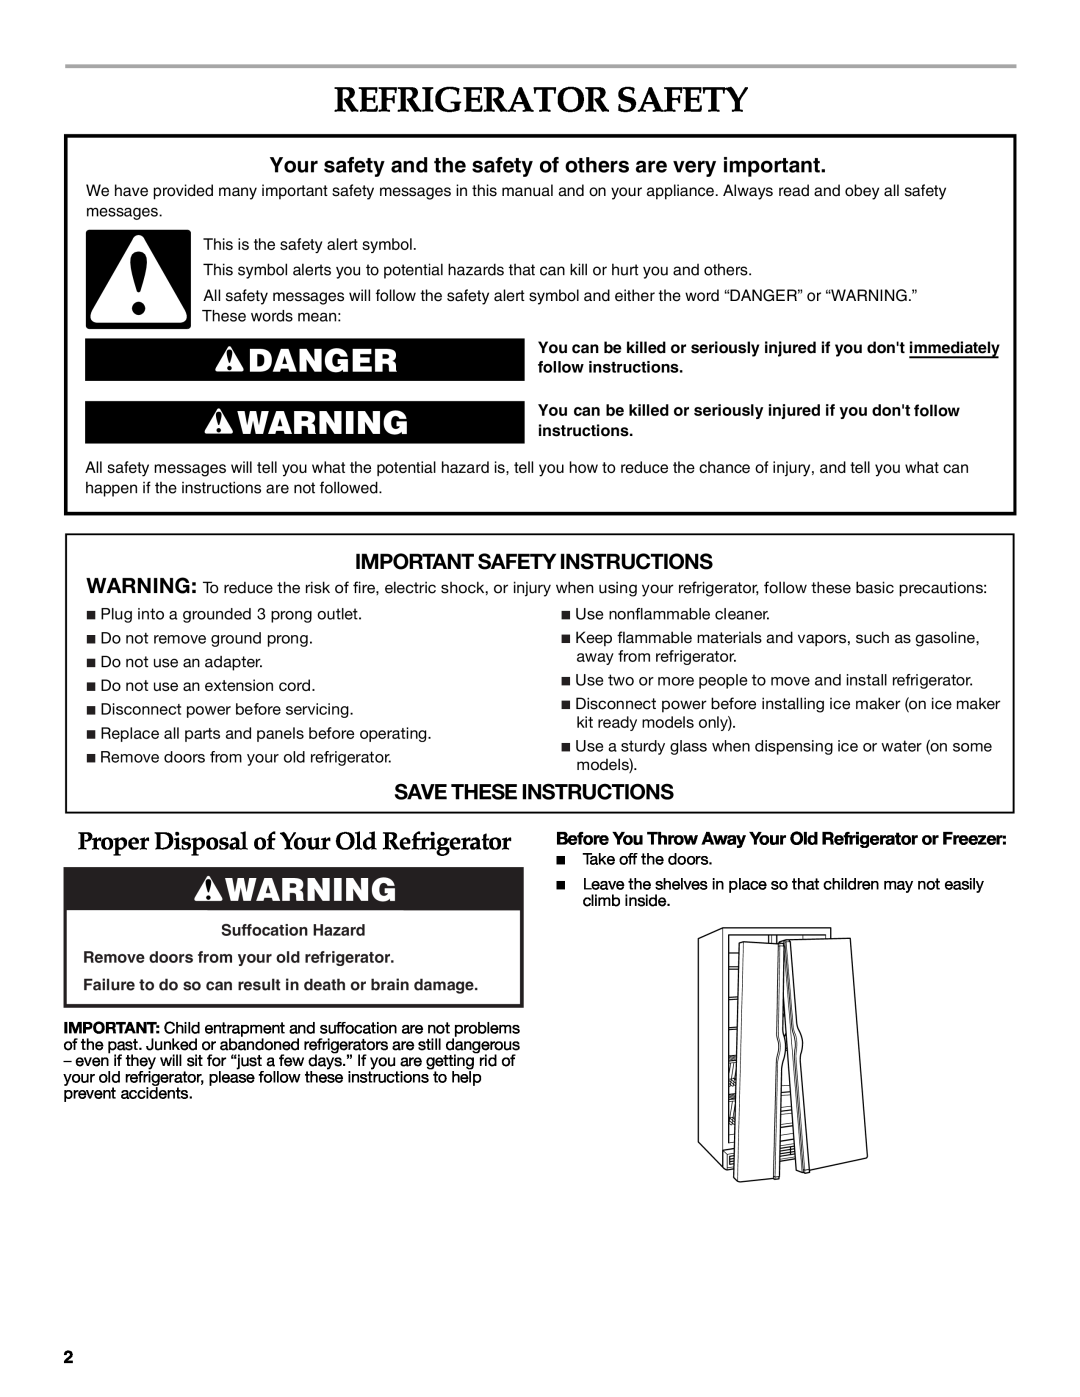 KitchenAid KSRF25FRWH00 Refrigerator Safety, Danger, Proper Disposal of Your Old Refrigerator, Save These Instructions 